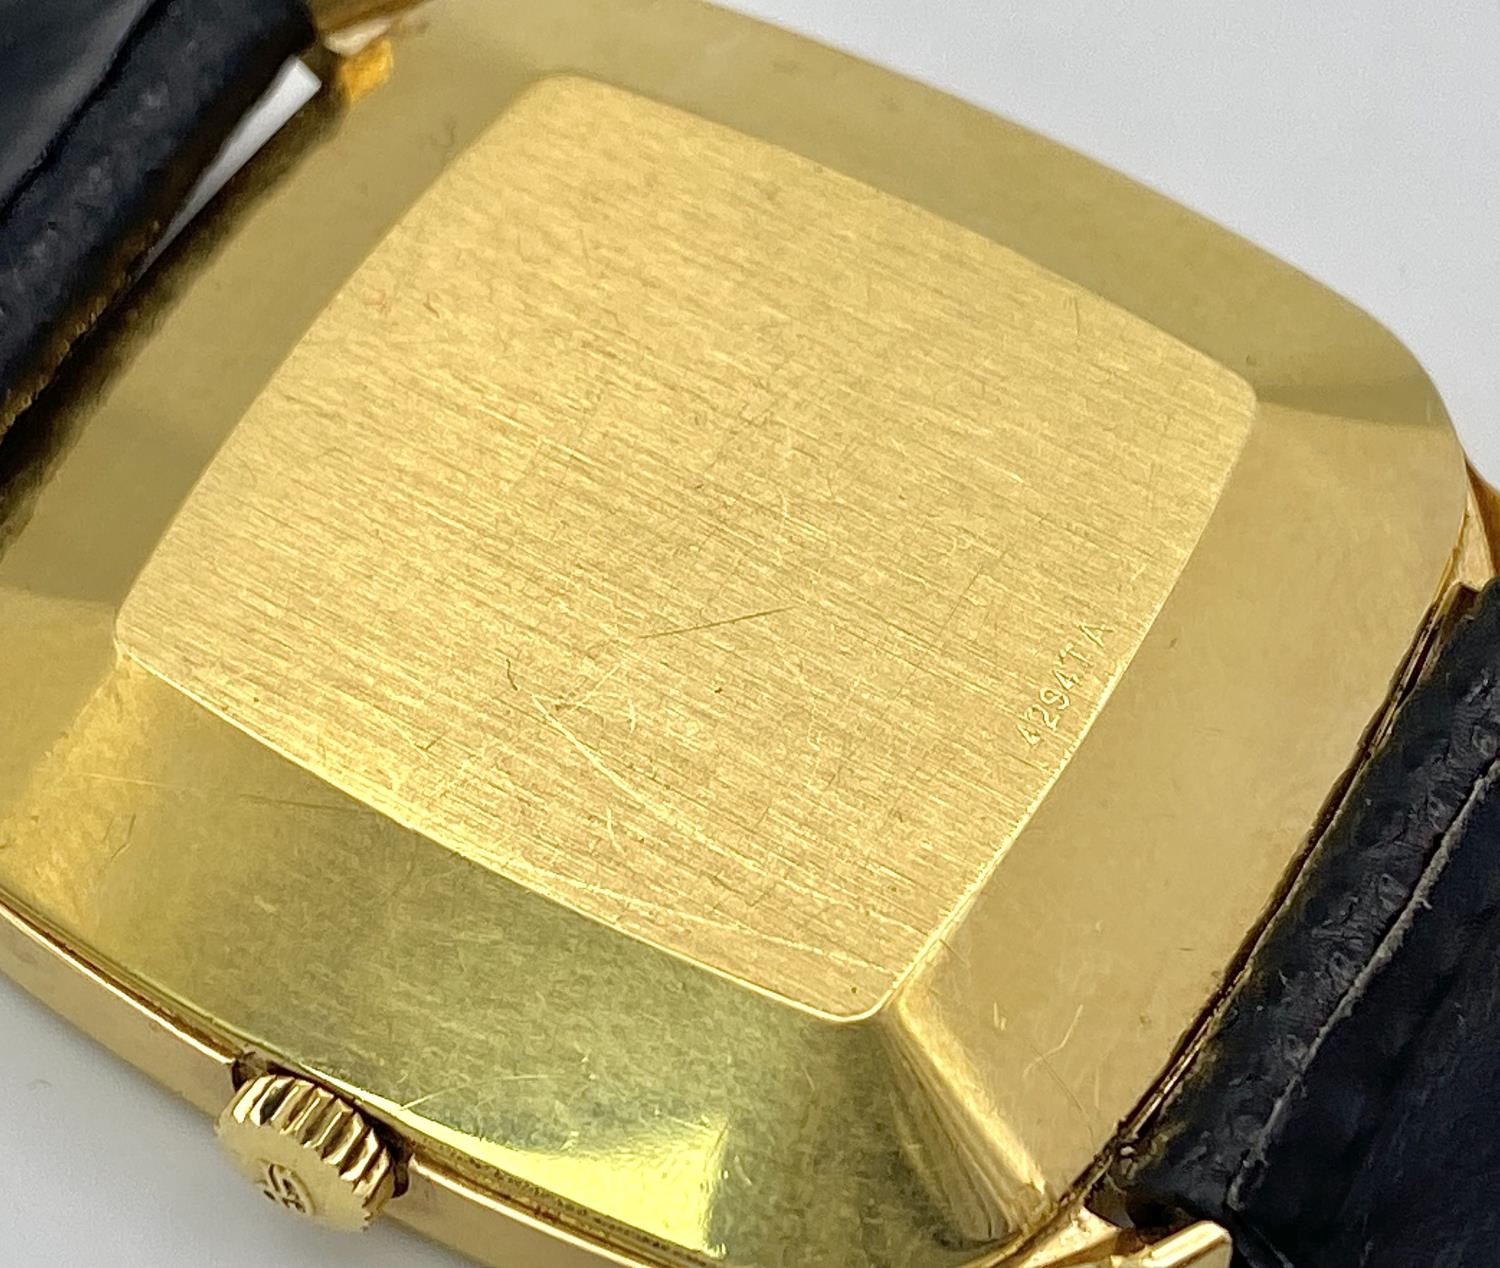 A Girard Perregaux Gold Plated Gyromatic Gents Watch. Black leather strap. Gold plated case - - Image 5 of 6